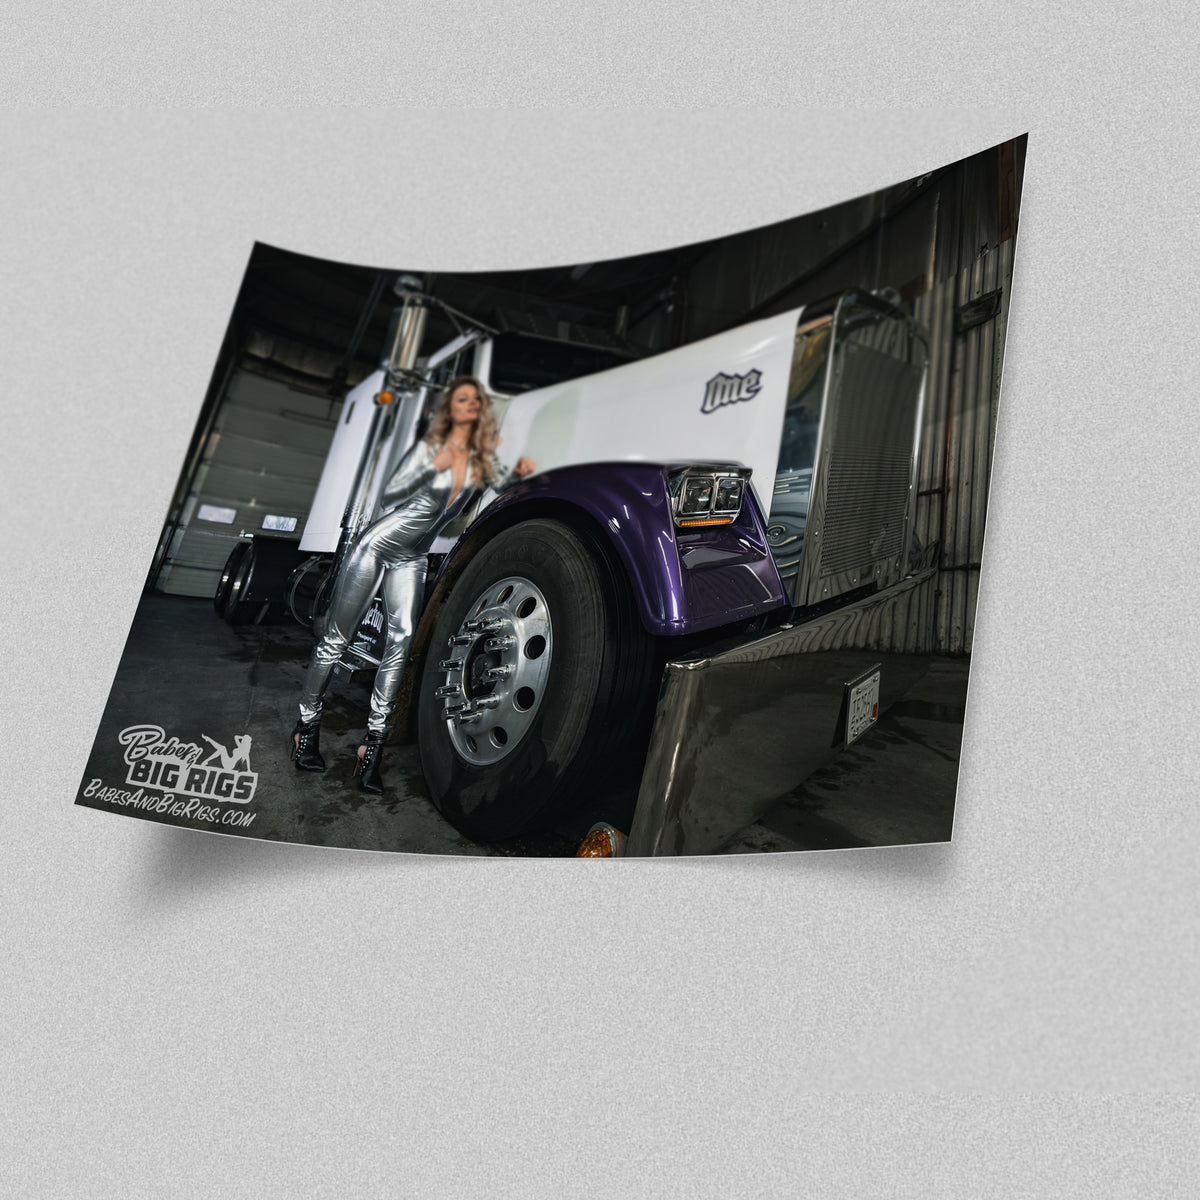 Babes and Big Rigs Poster Prints